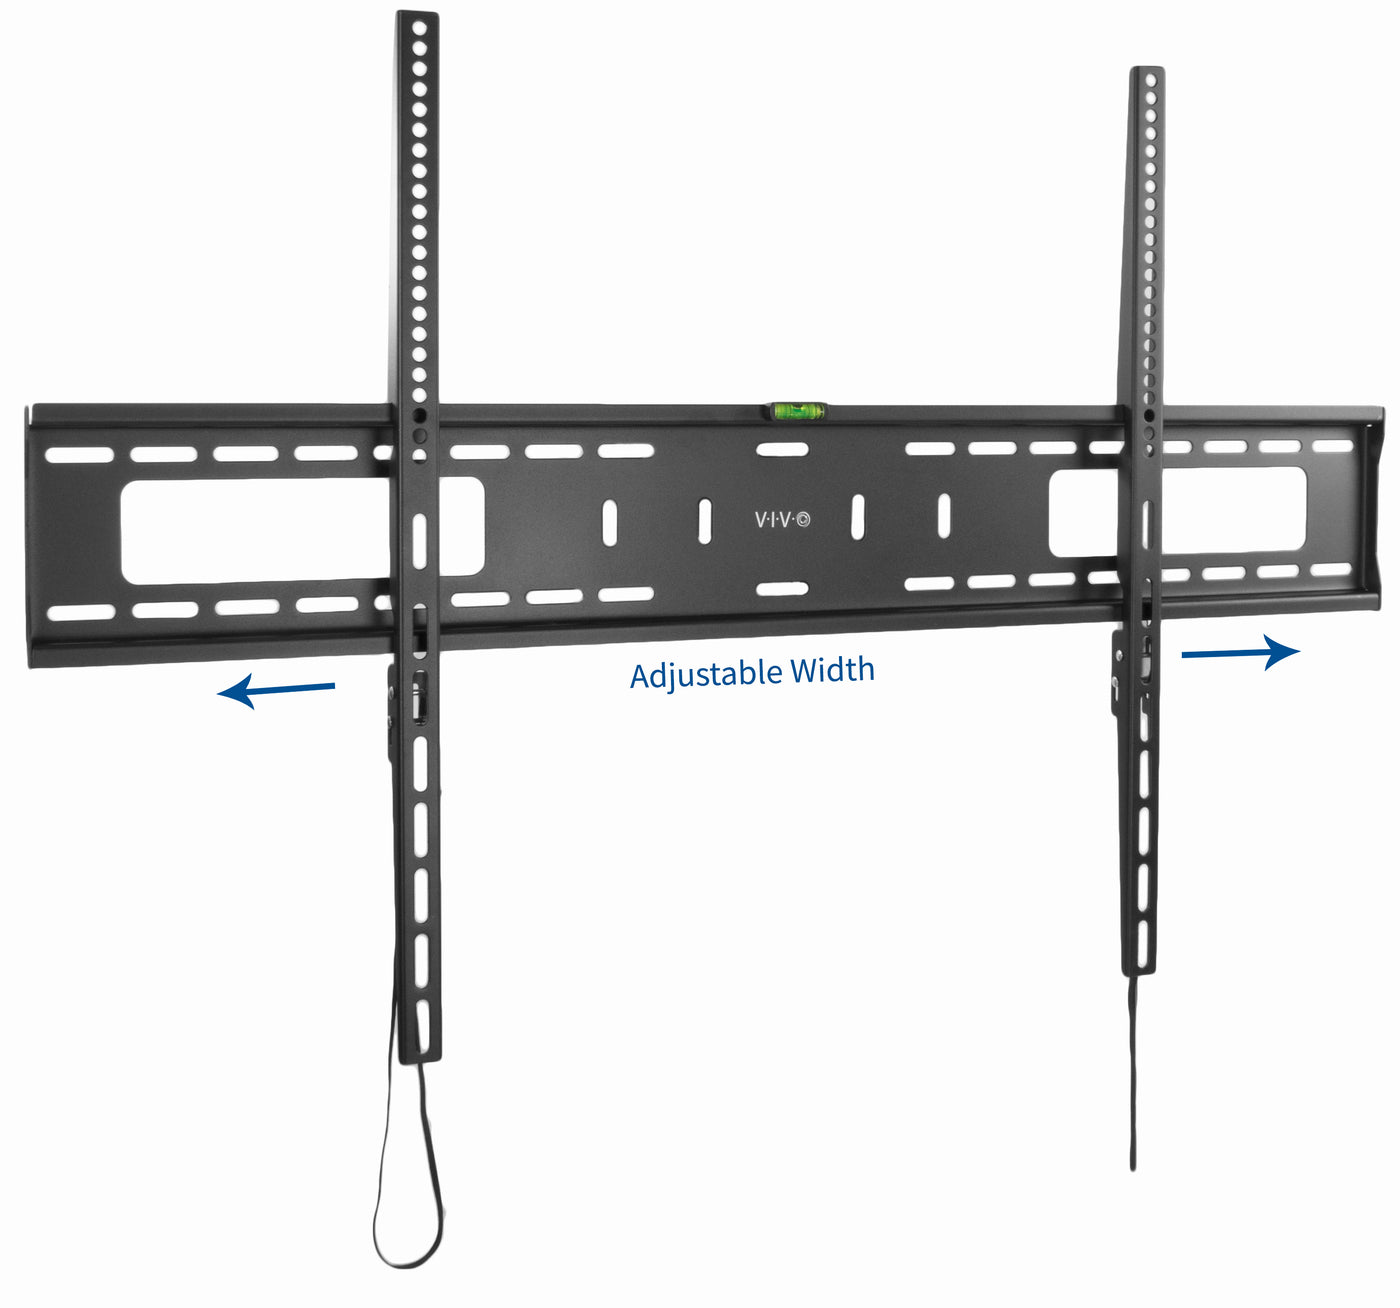 Sturdy adjustable extra large TV wall mount with width adjustment.